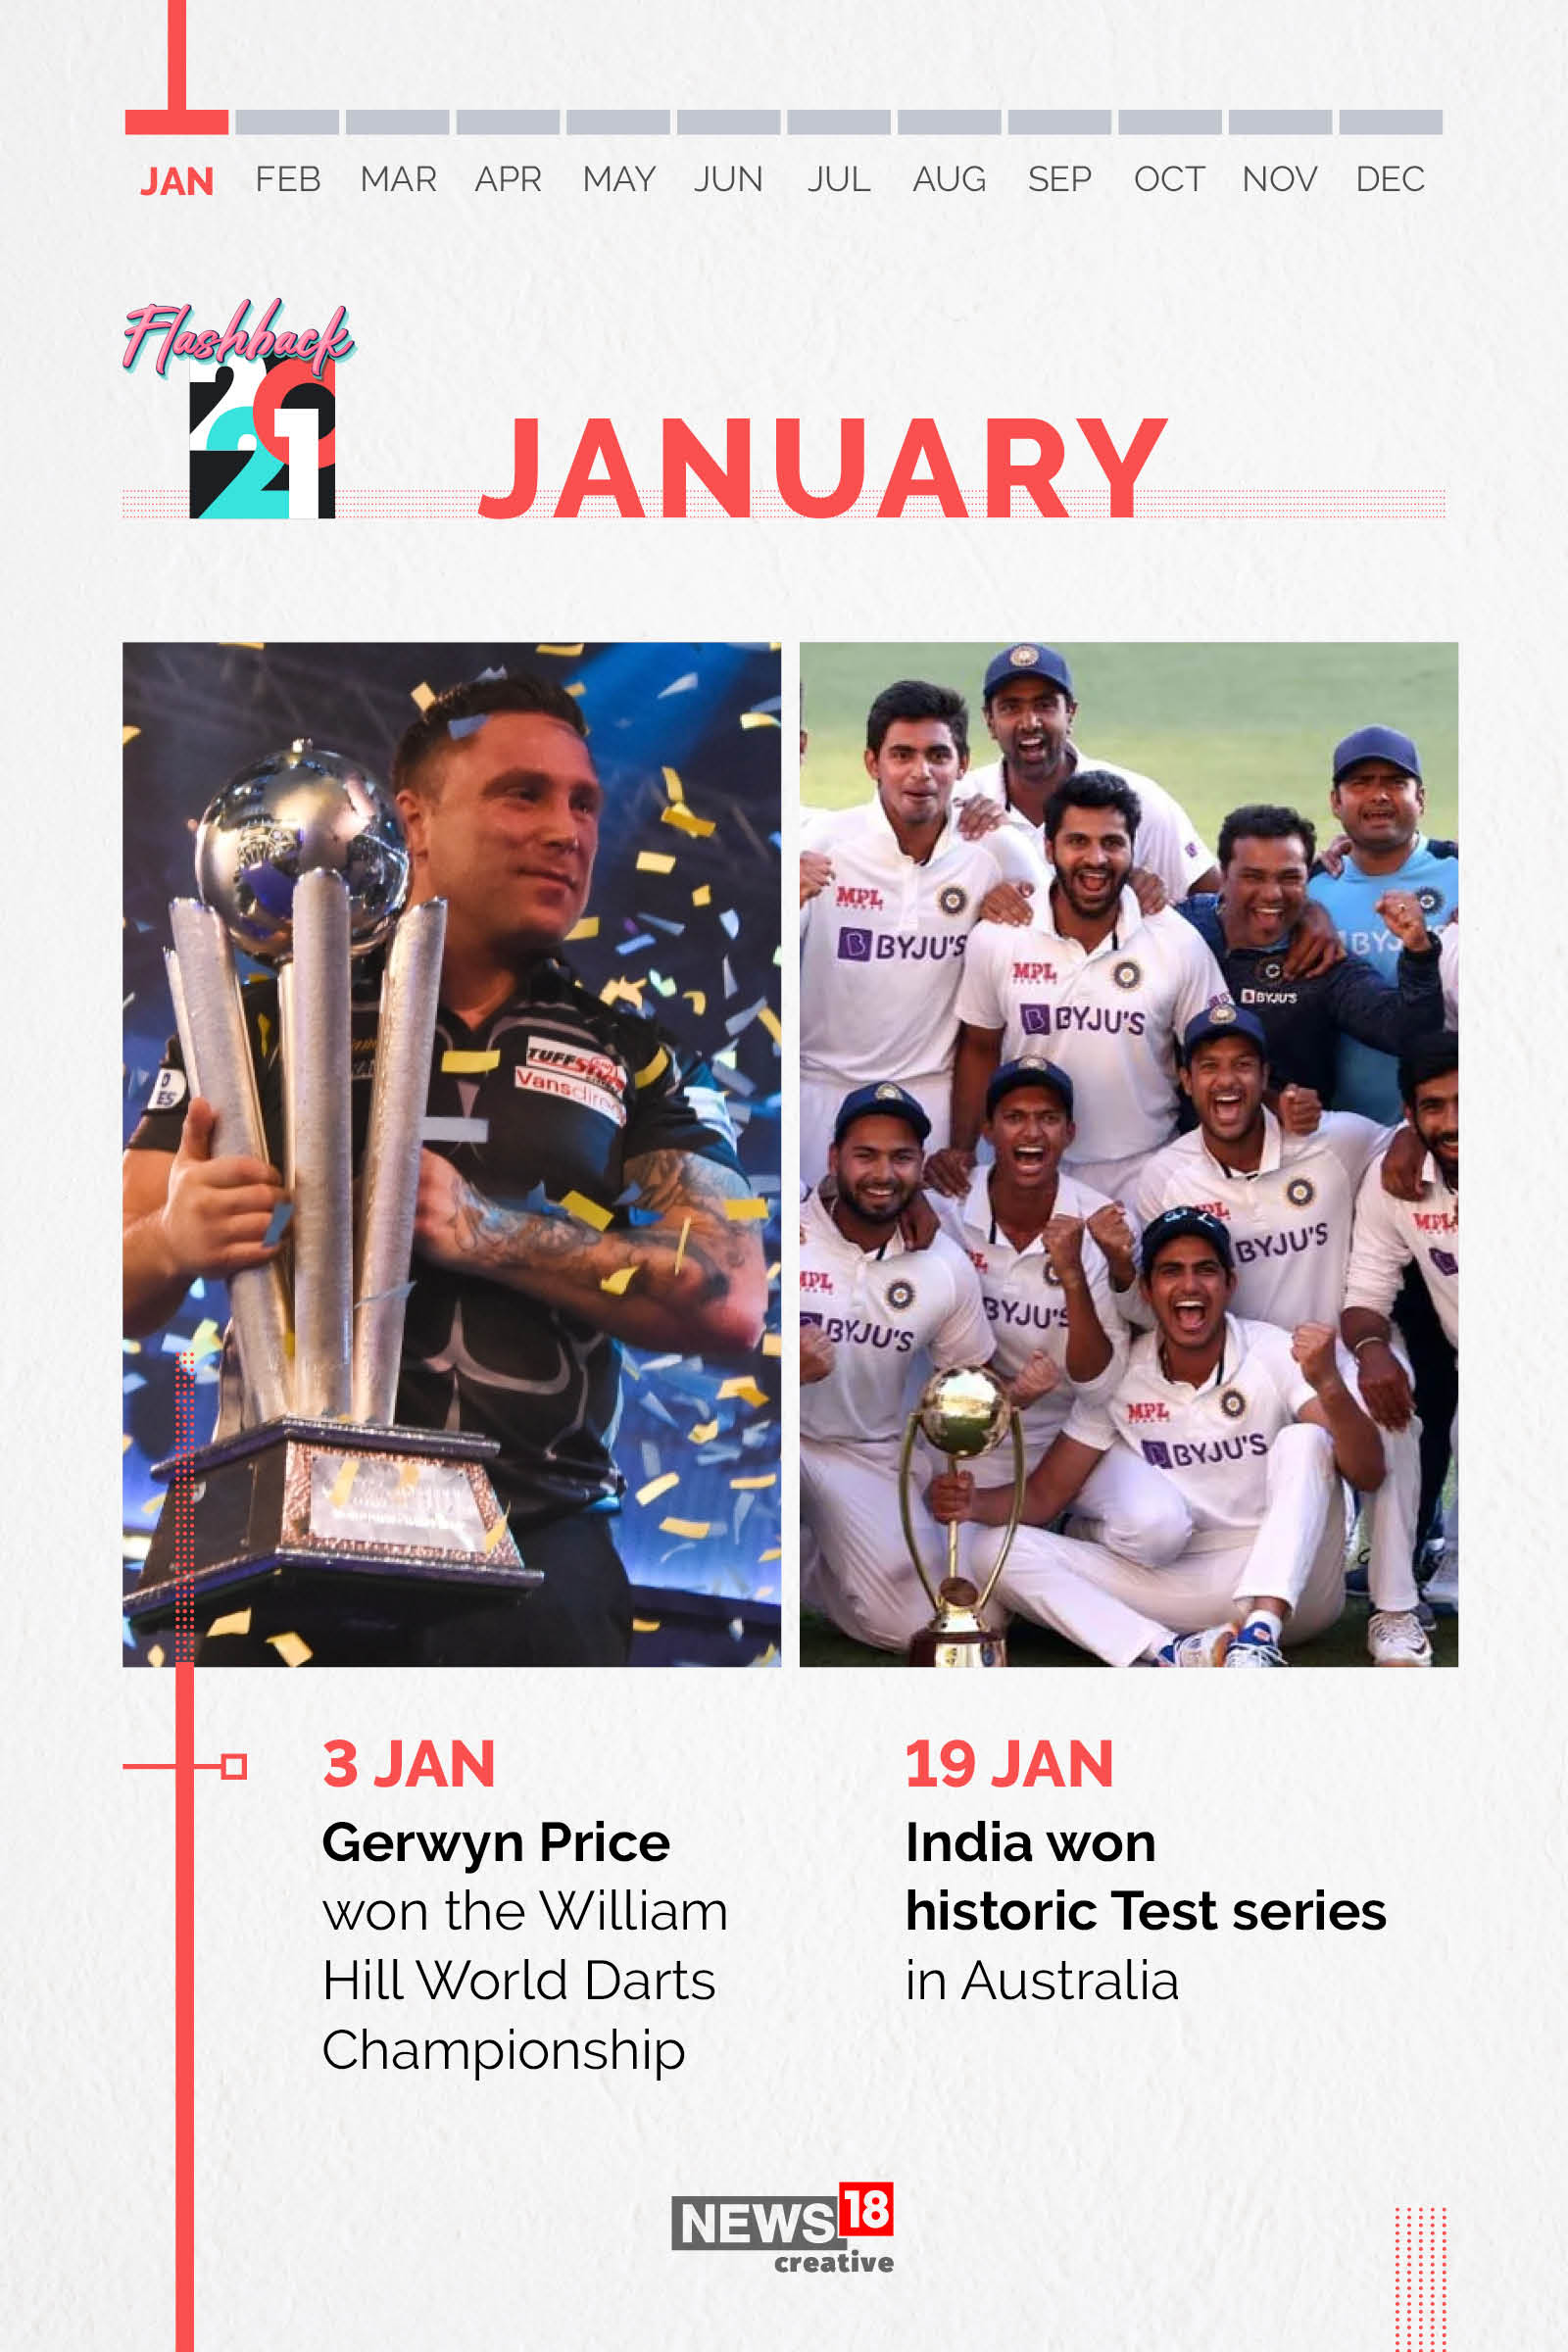 Forbes India 2021 Rewind: Best sports memories from an uncertain year